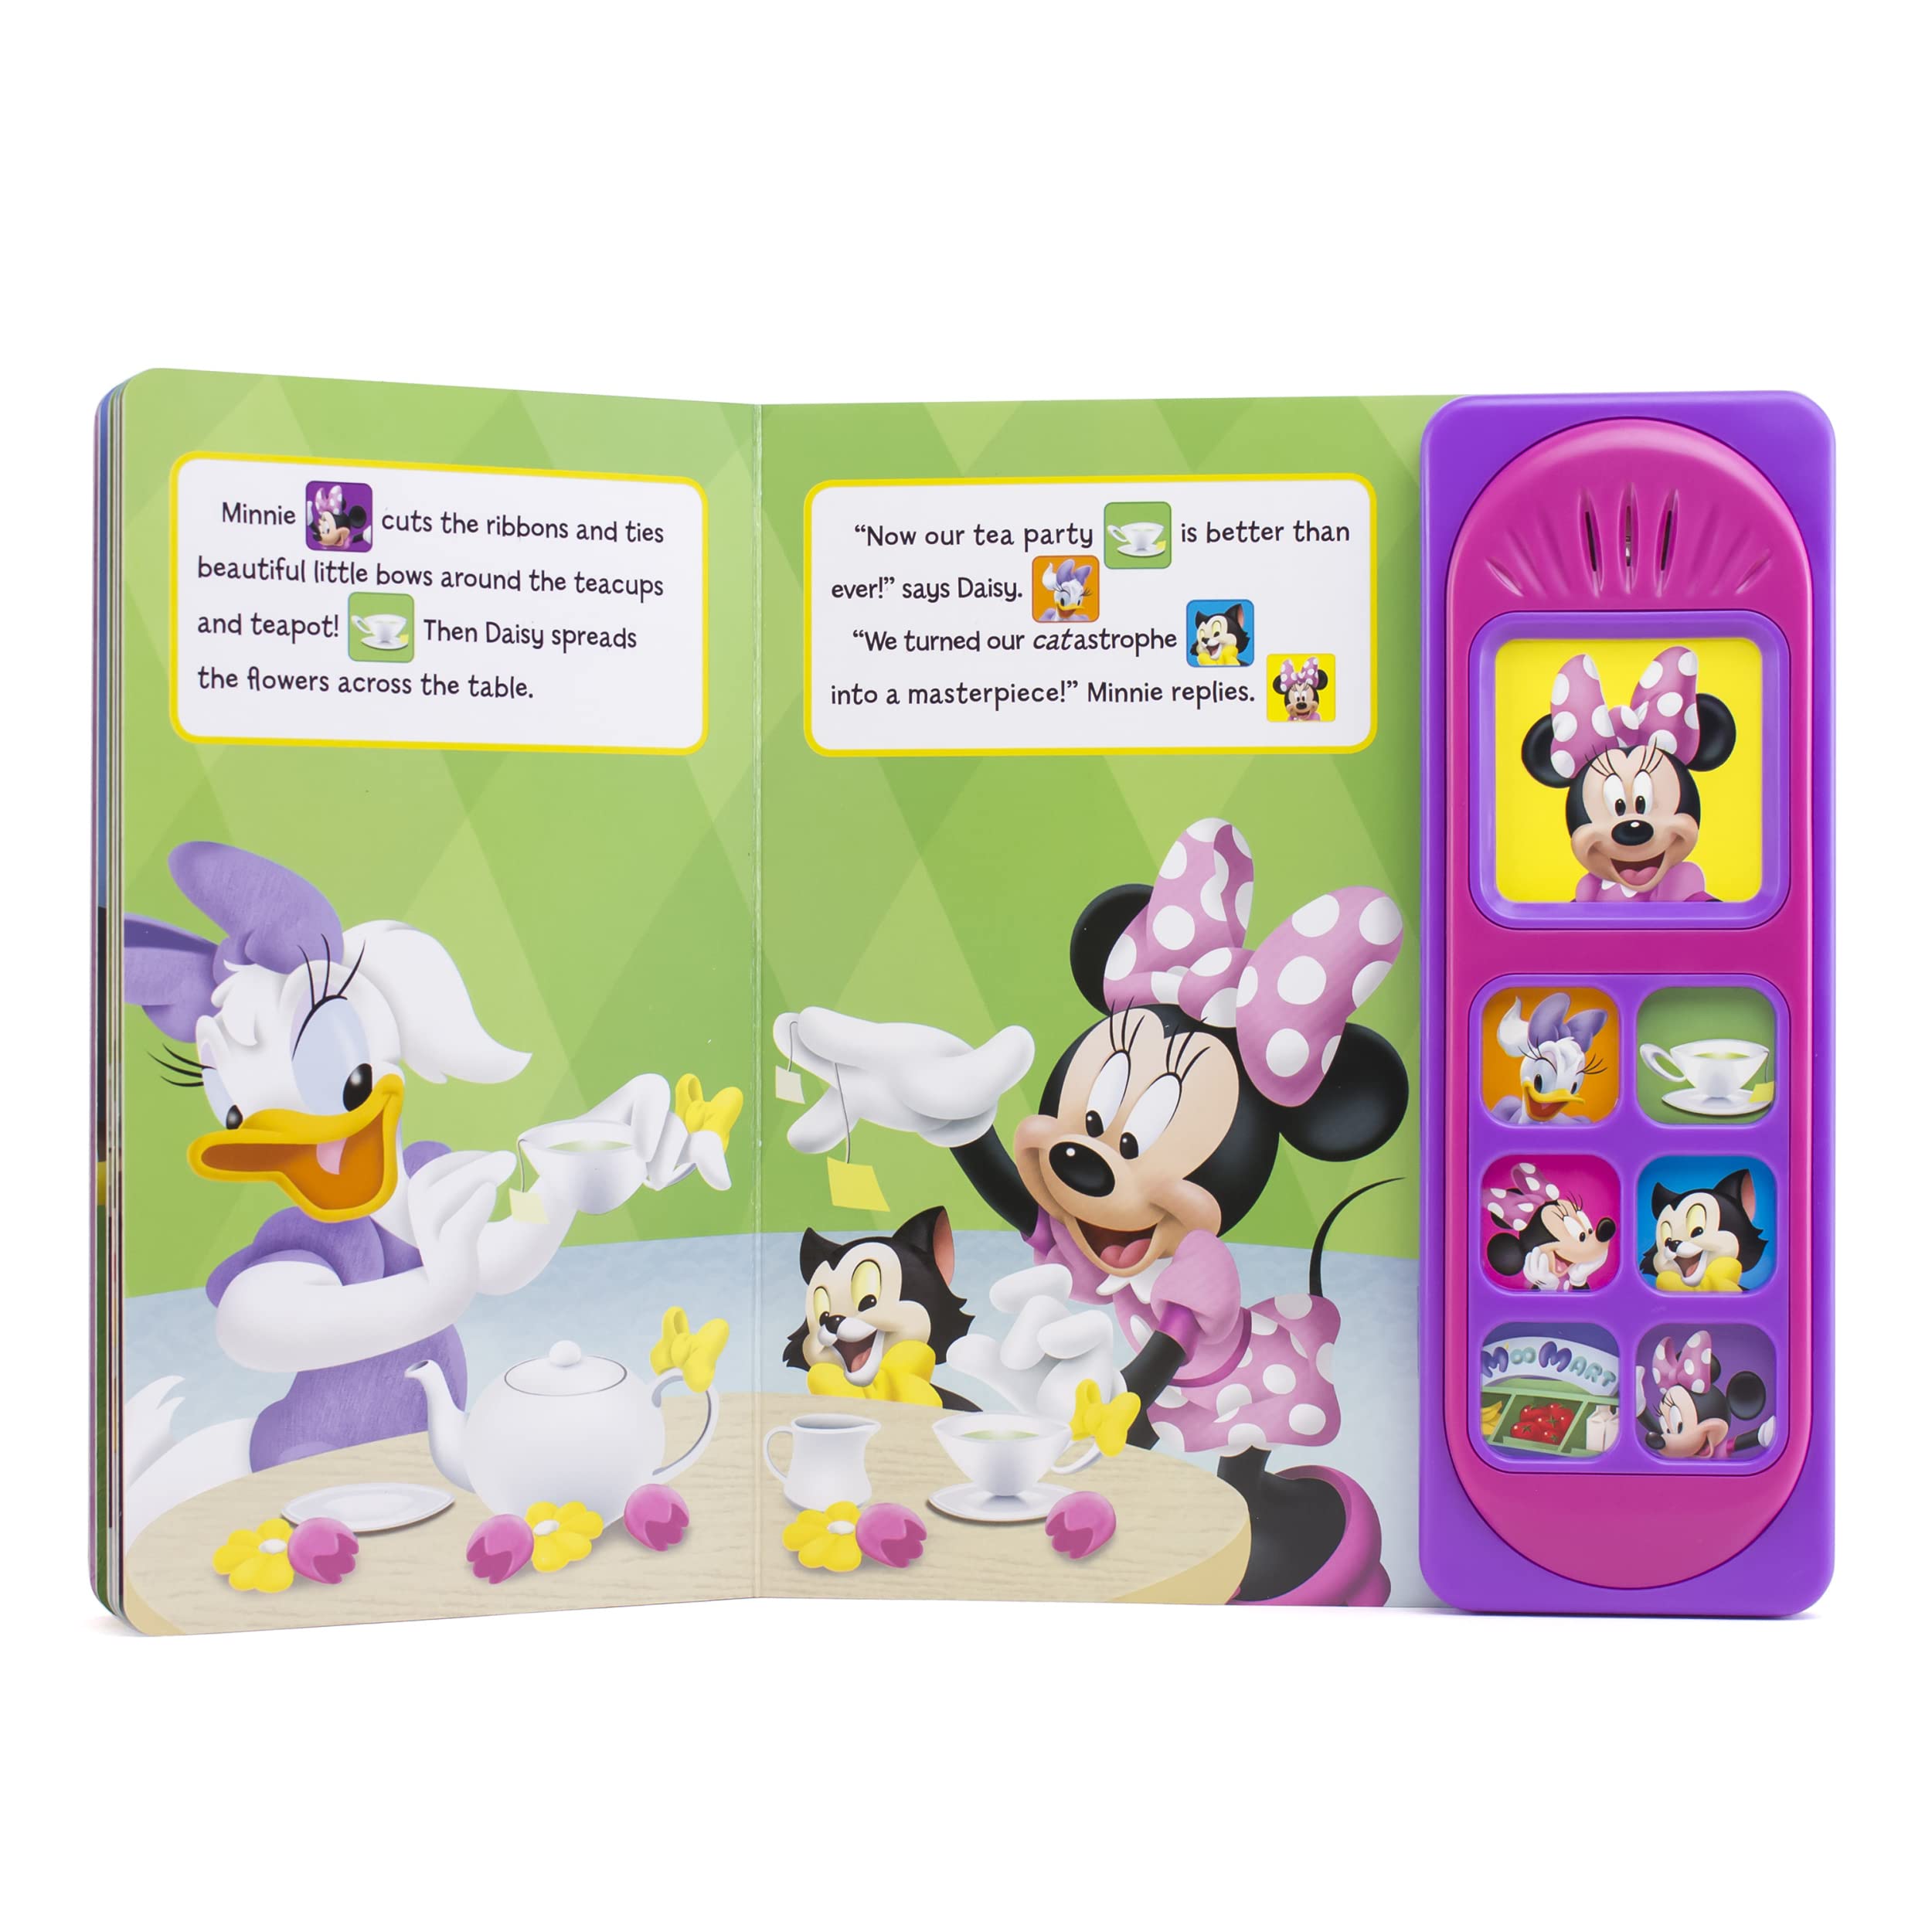 Disney Minnie Mouse - Let's Have a Tea Party! Little Sound Book - PI Kids (Play-A-Song)